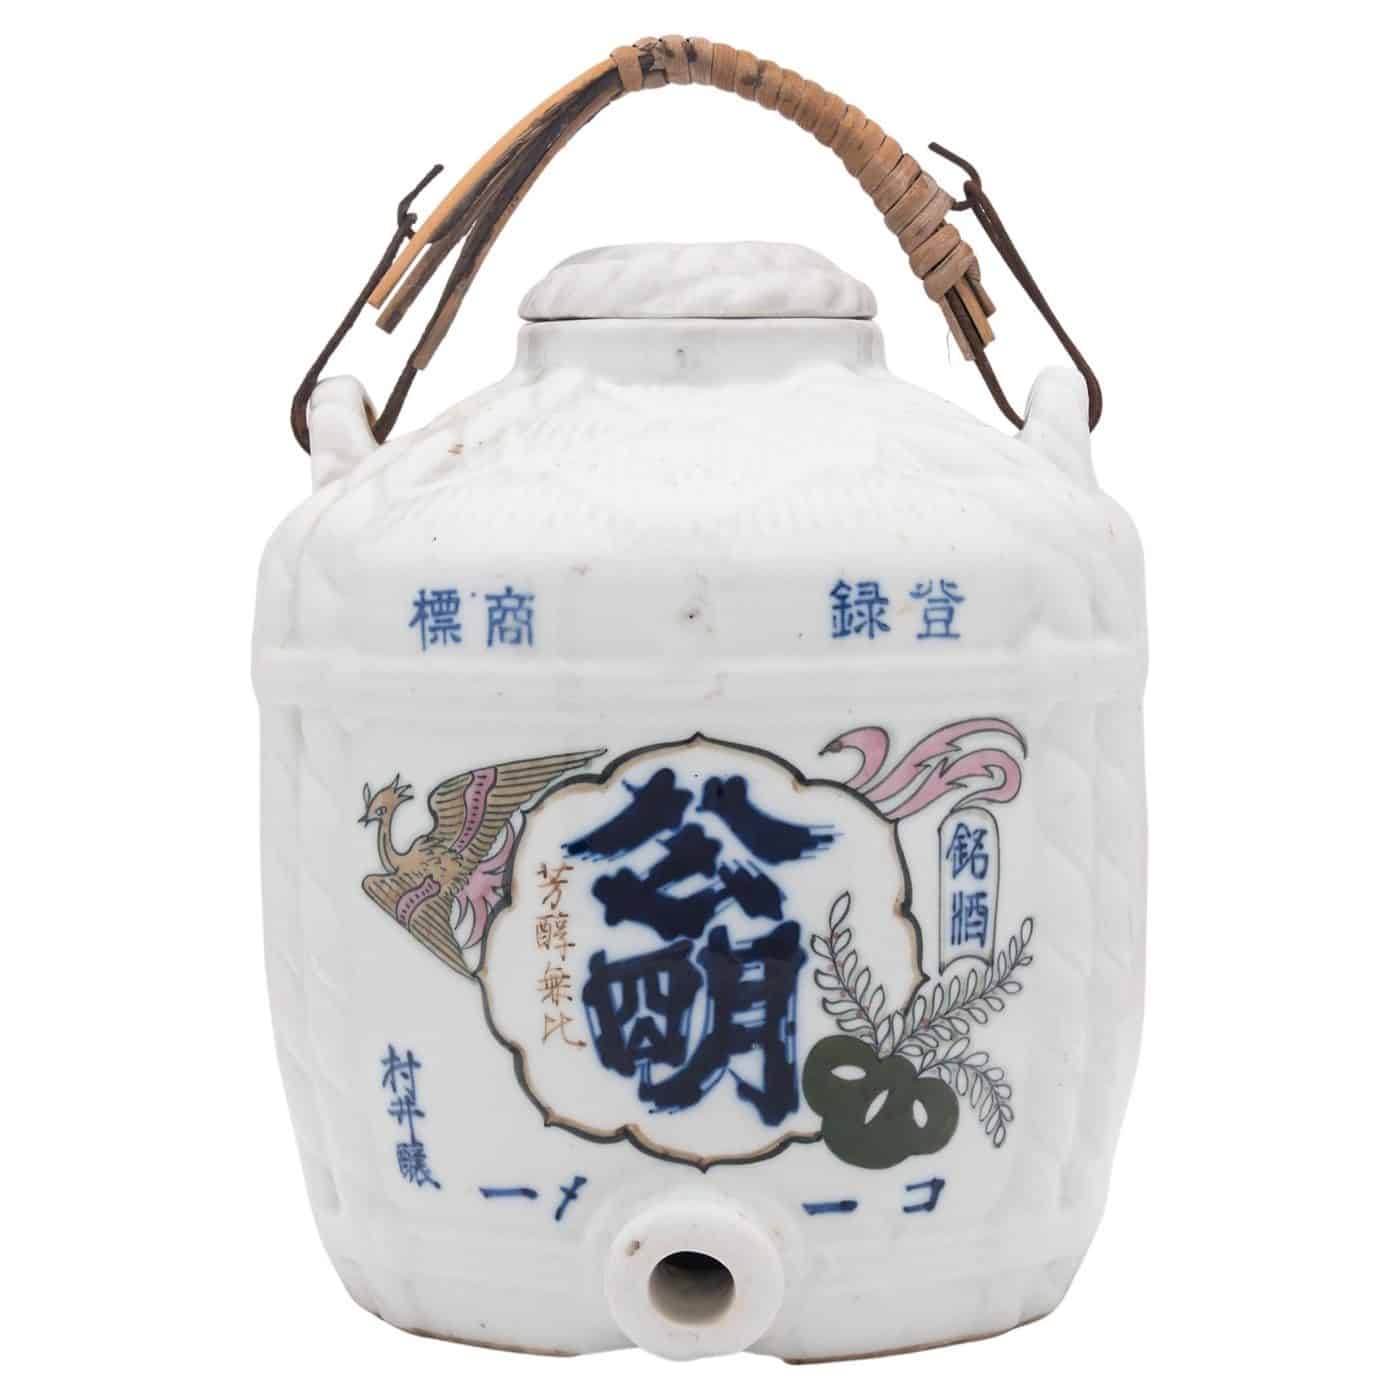 A Japanese blue-and-white sake cask